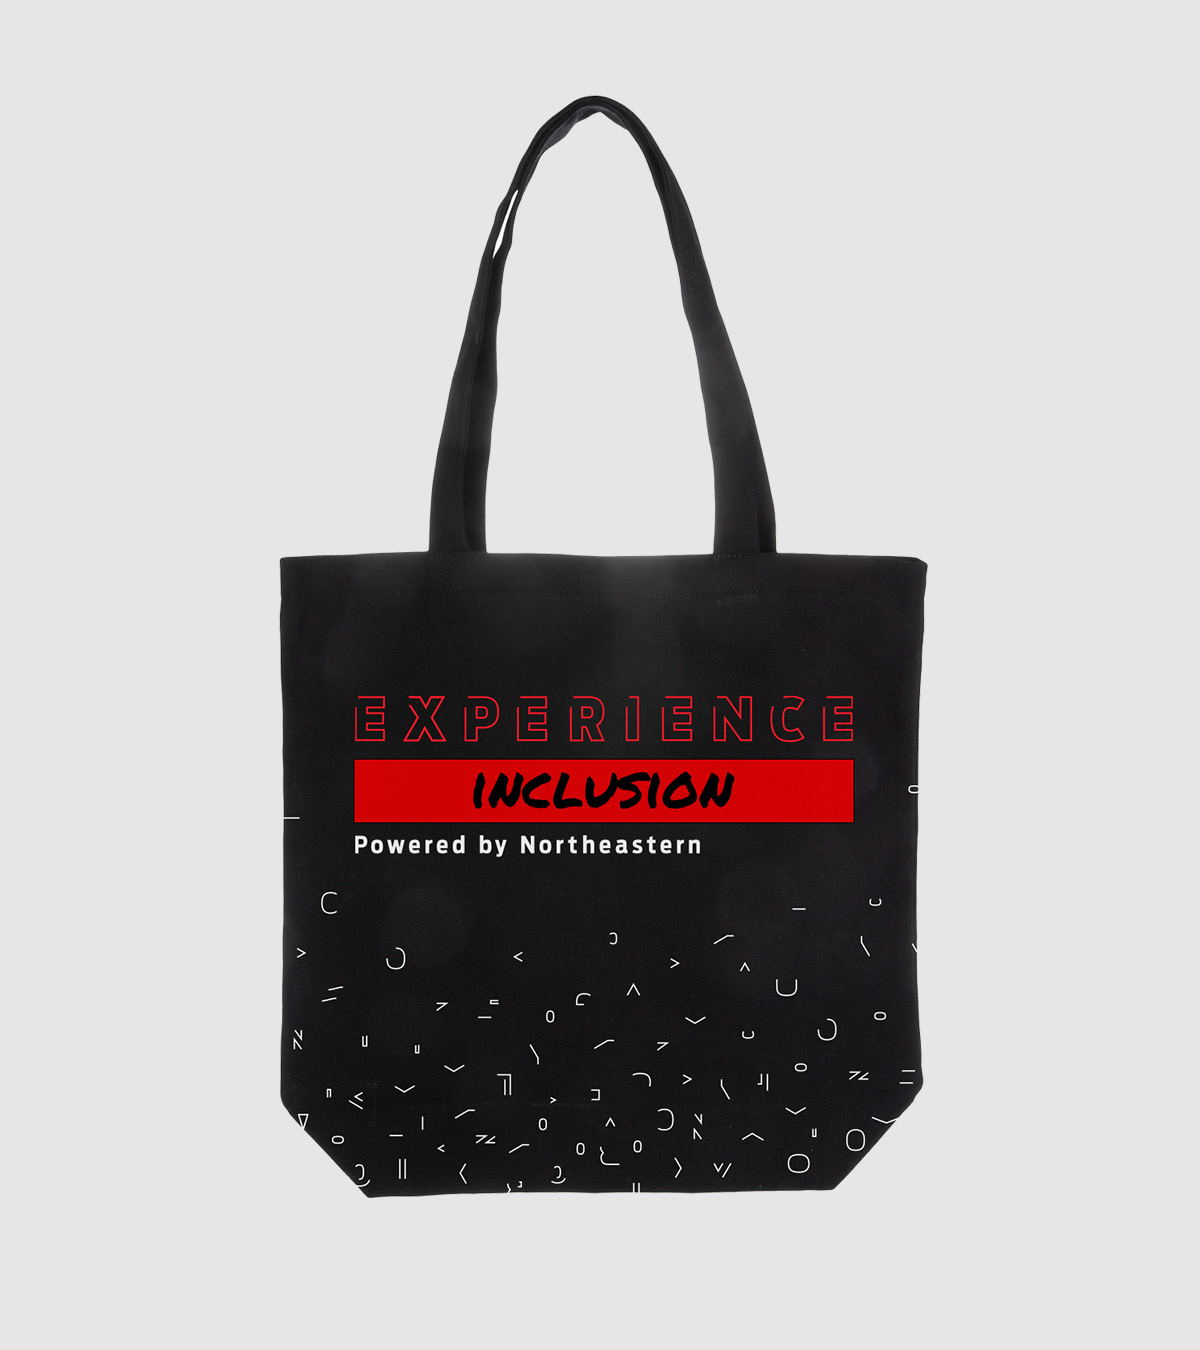 Tote bag - Experience Inclusion